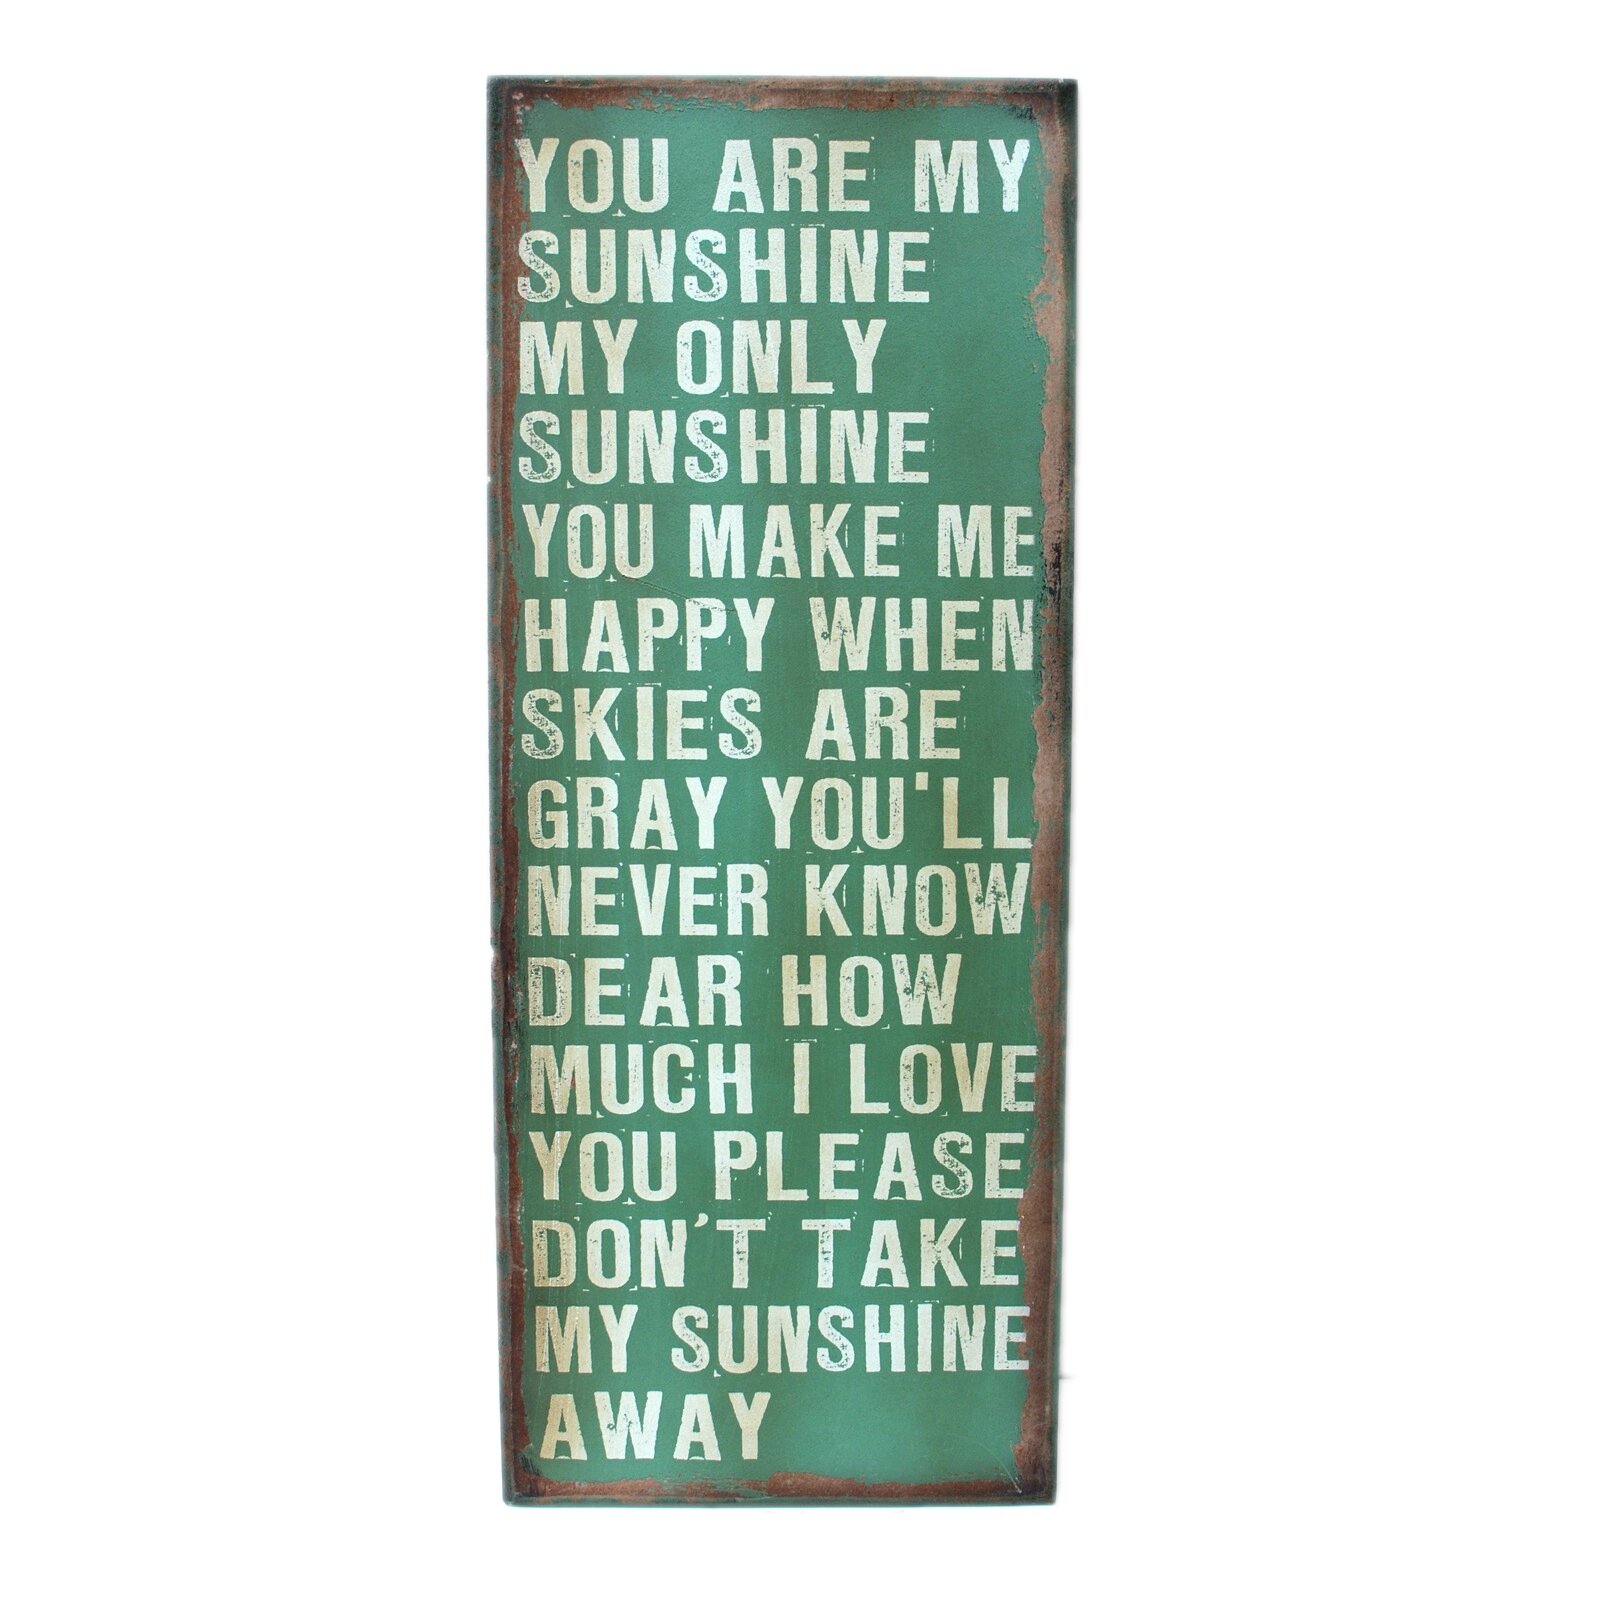 Attraction Design Home u0027You Are My Sunshineu0027 Wood Wall ...